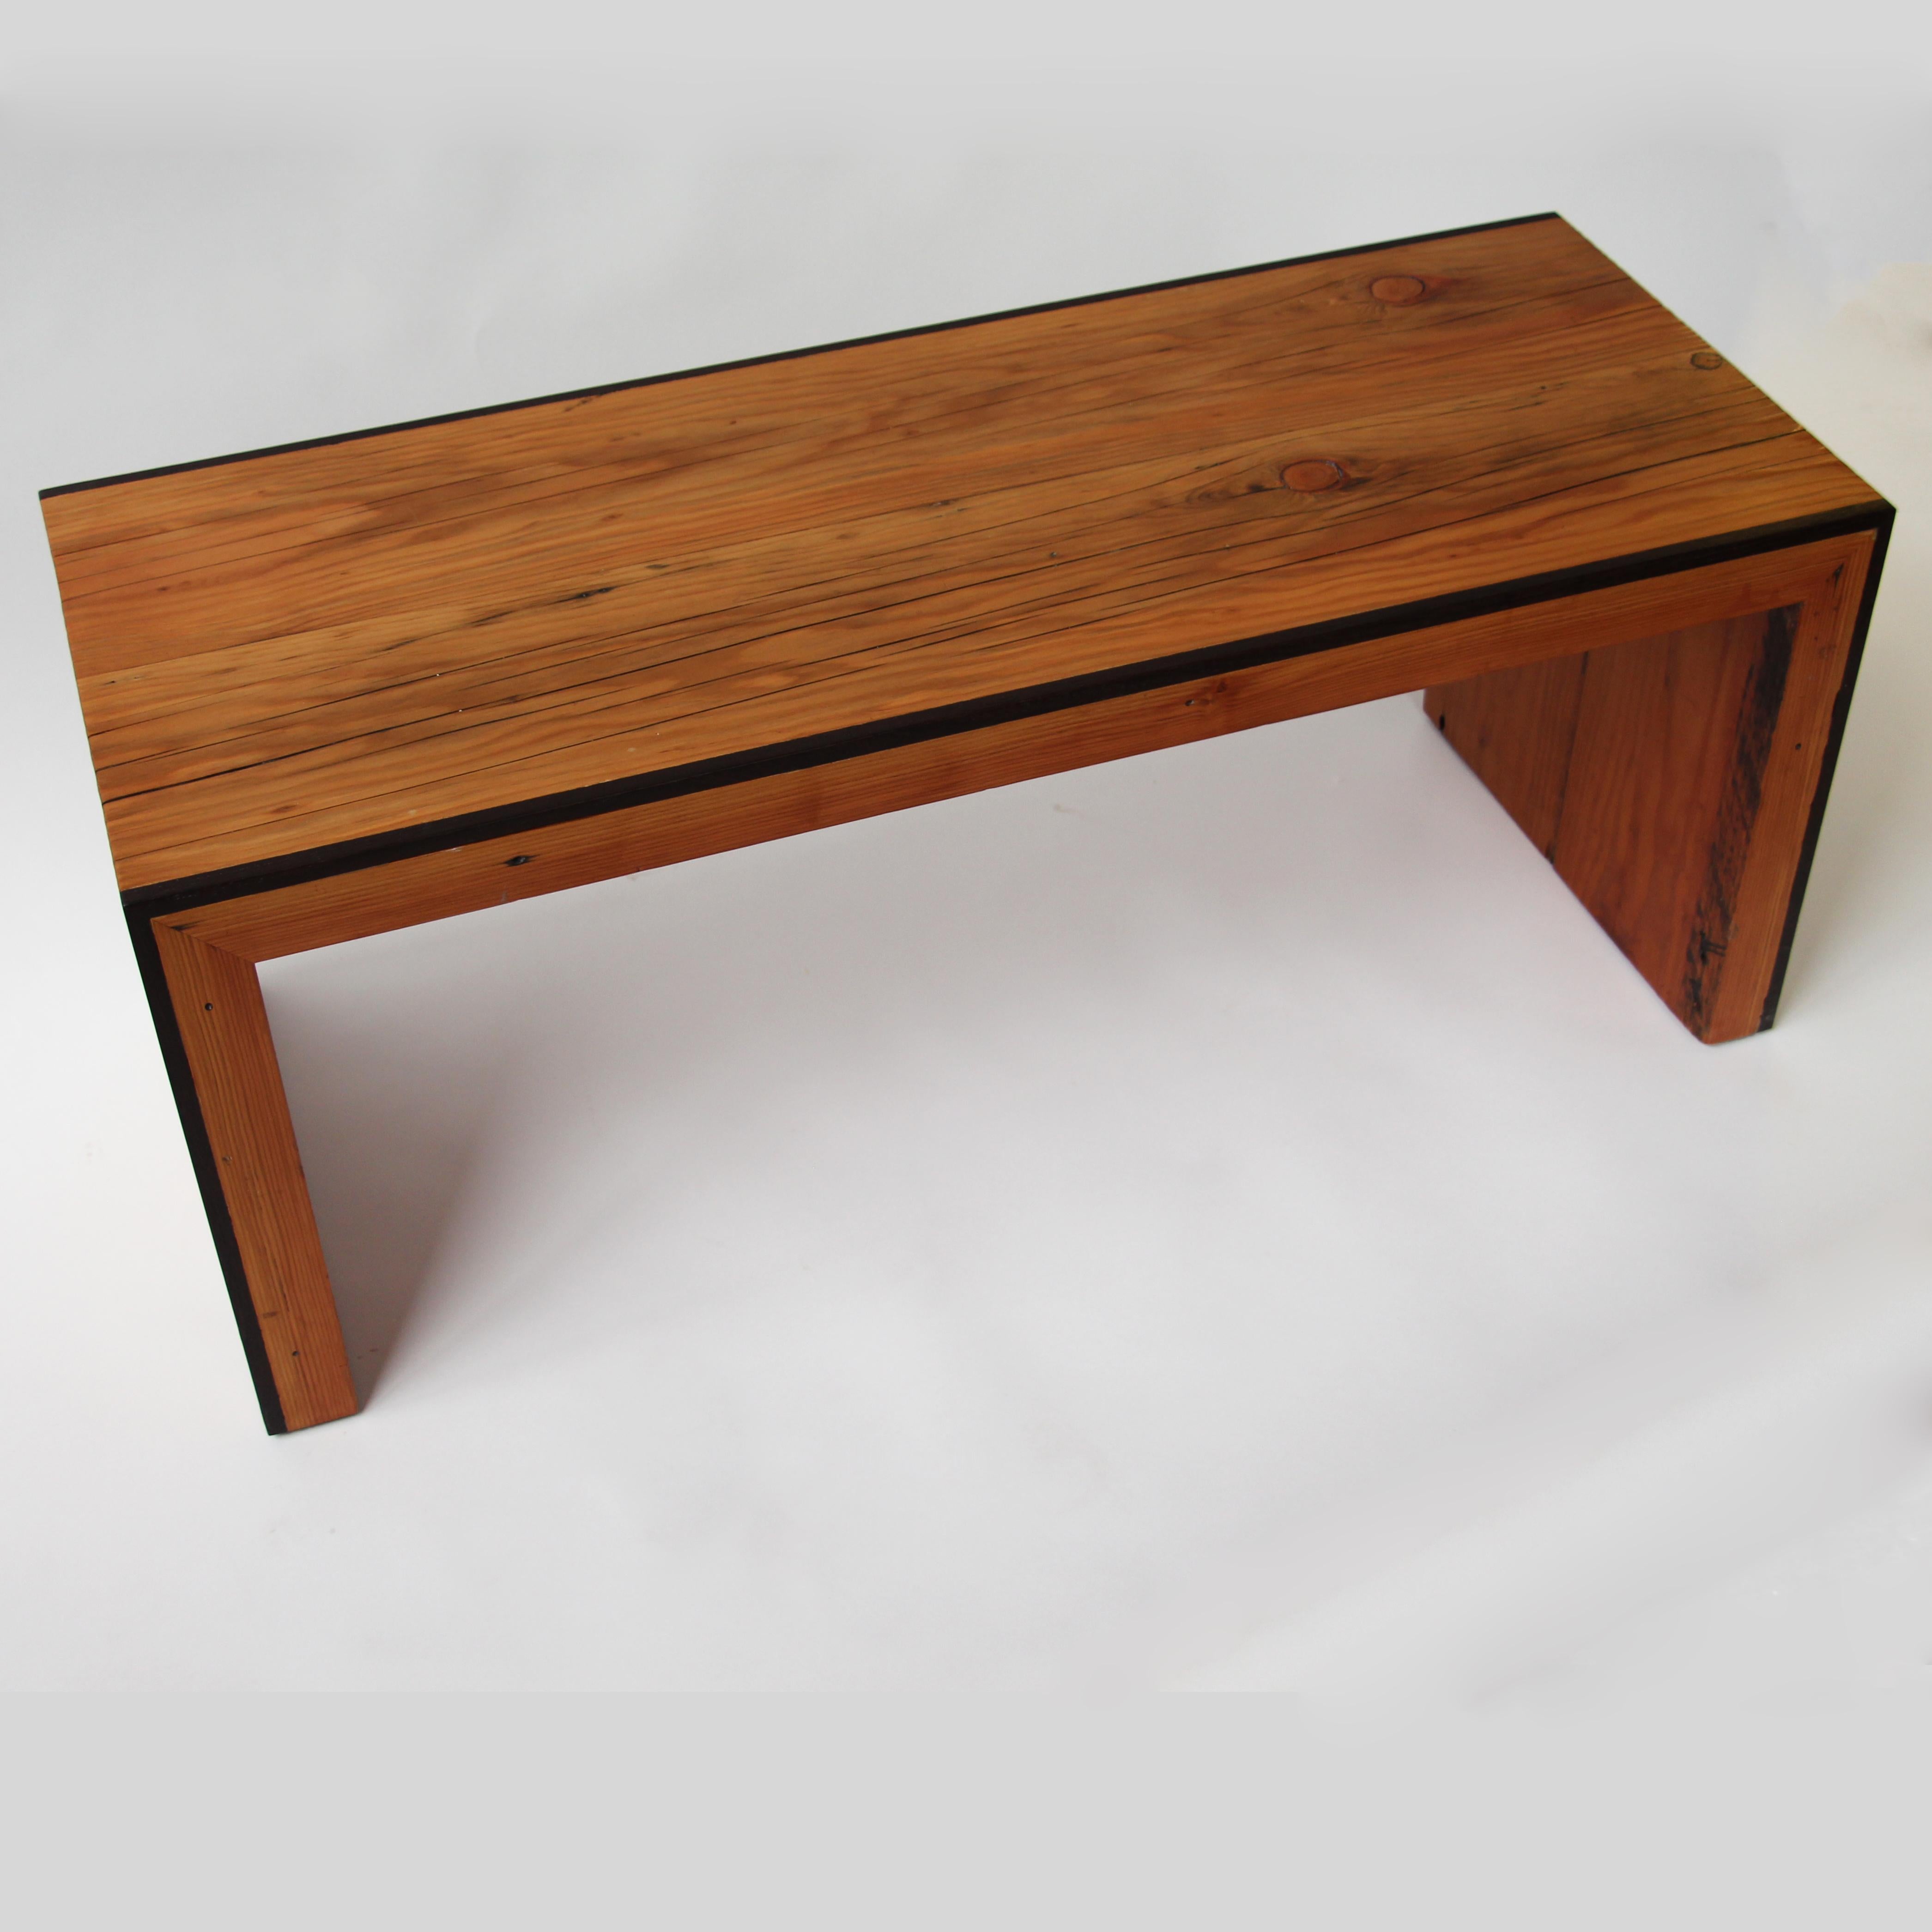 American Monster Island Coffee Table Bench in Reclaimed Fir, Edged in Wengue - in stock